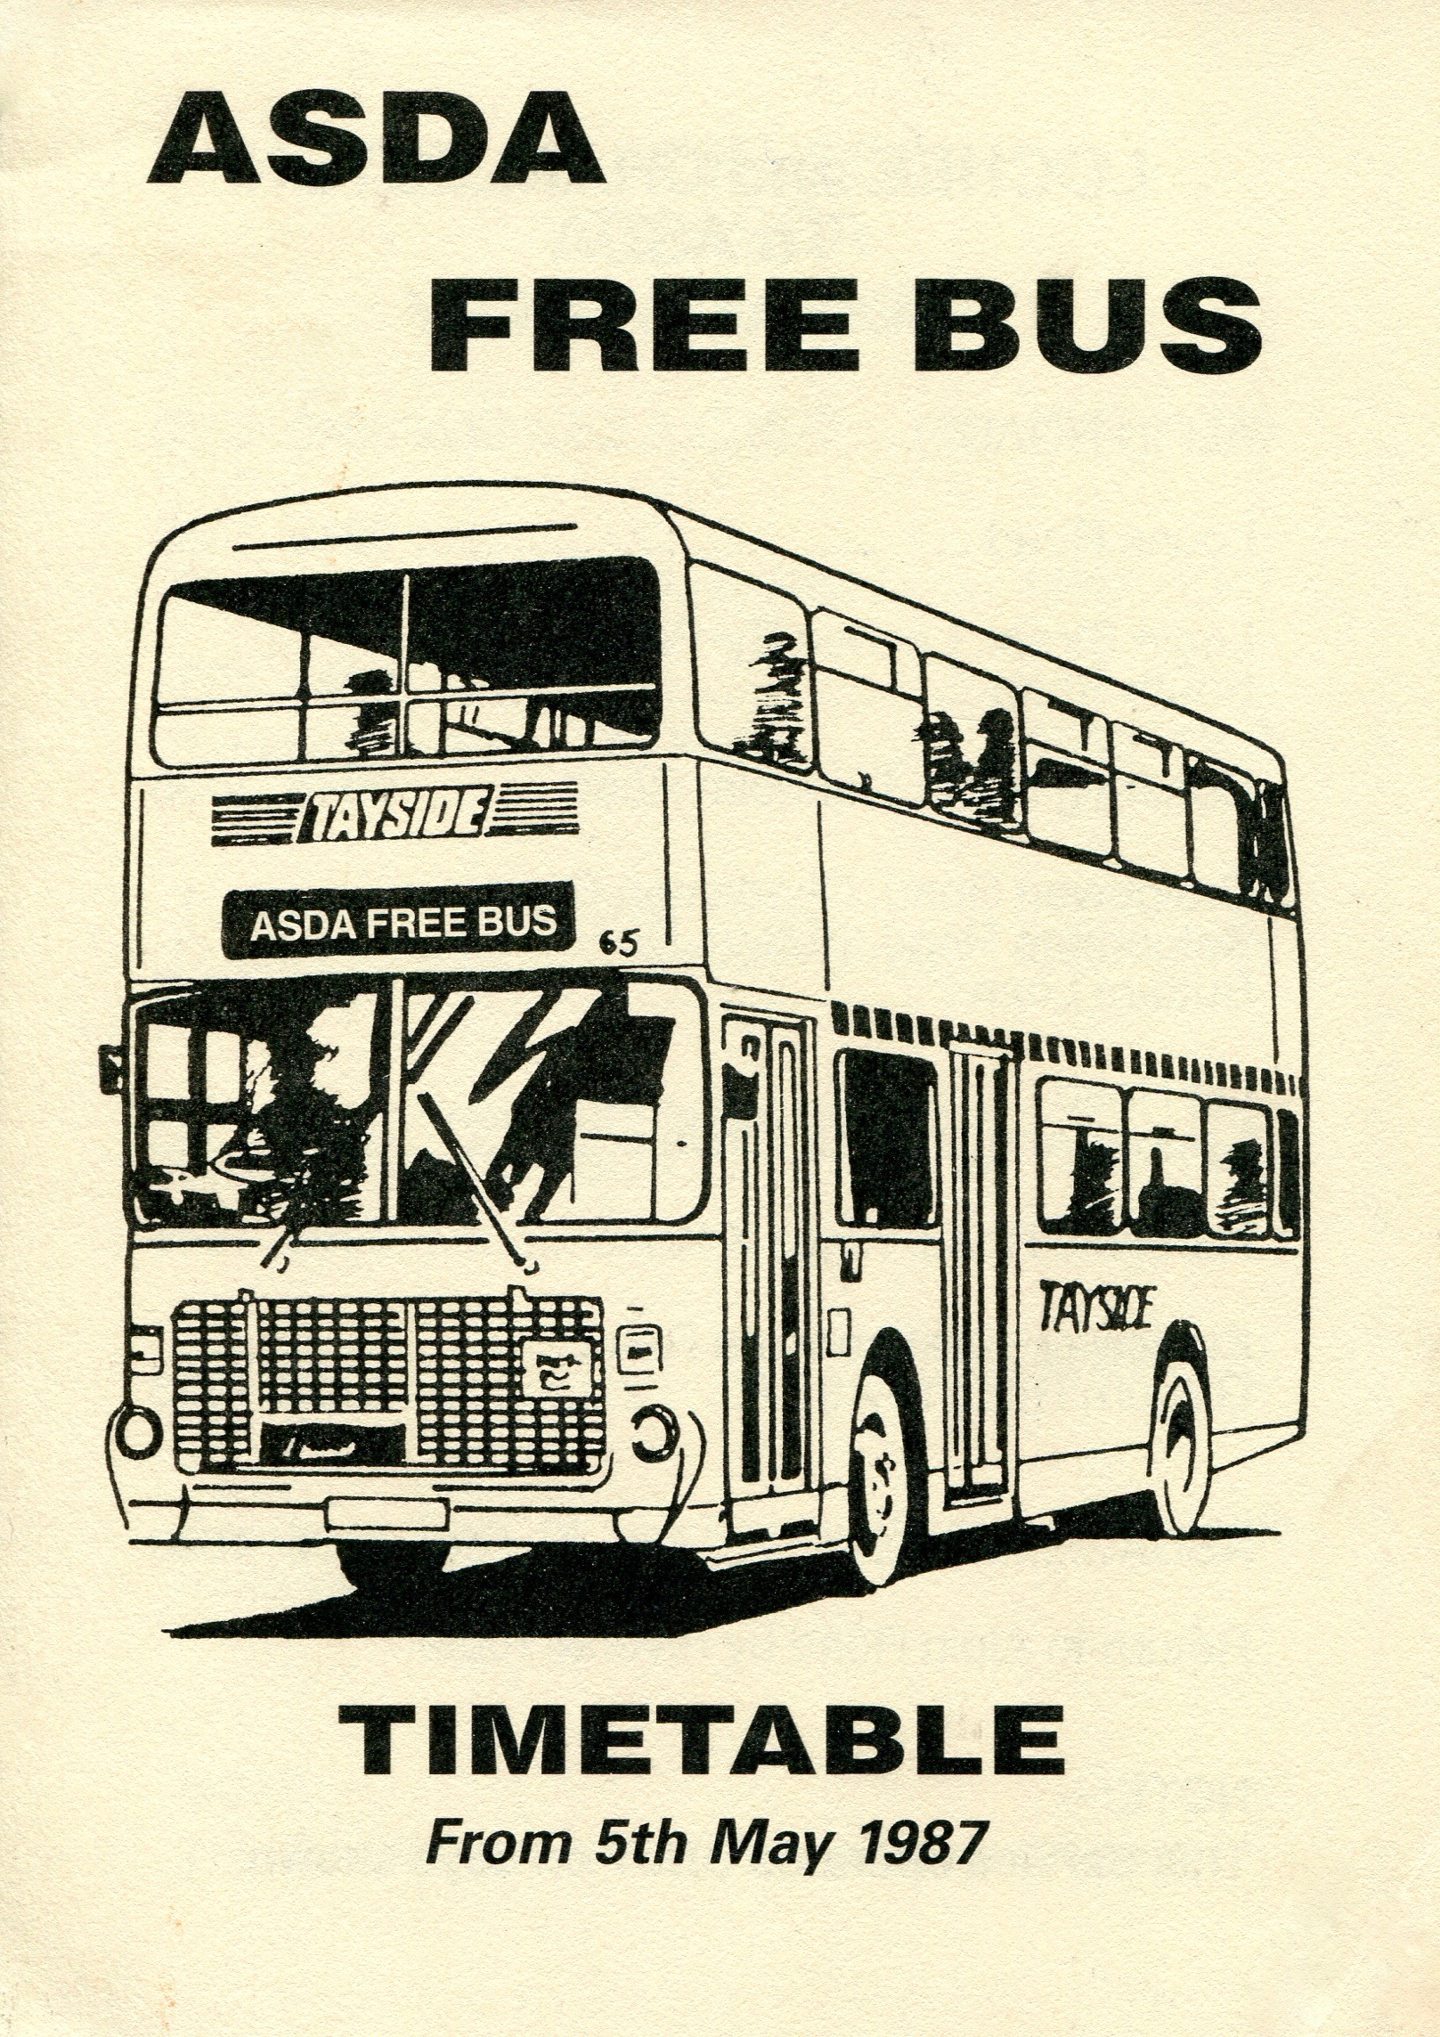 A line drawing on the front of the timetable for the free bus to Asda in 1987